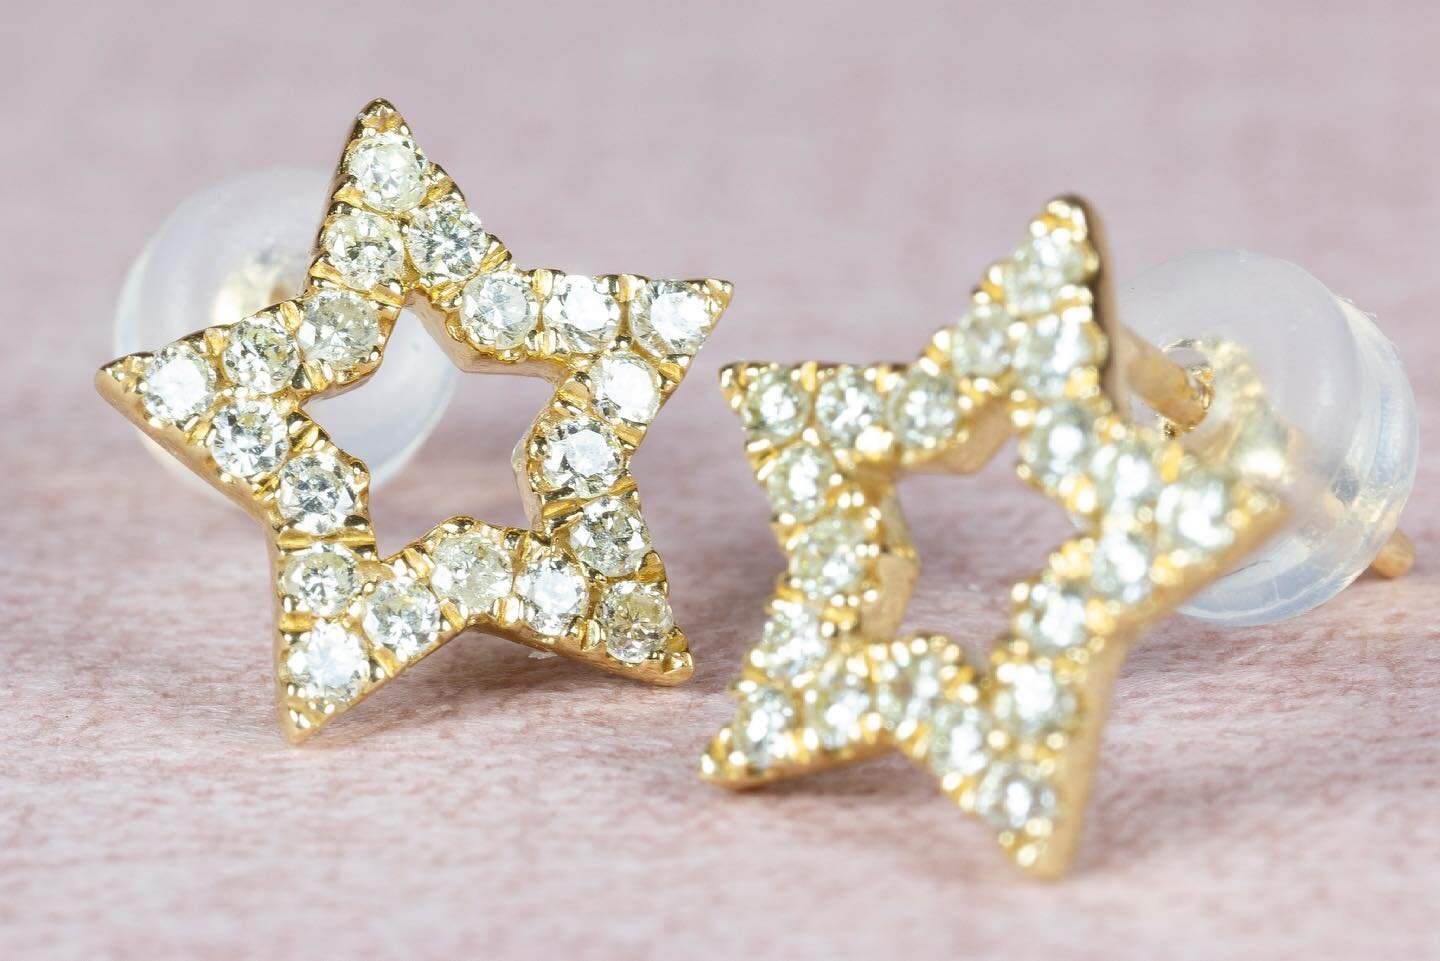 𝟏𝟎% 𝐨𝐟𝐟 𝐆𝐫𝐚𝐧𝐝 𝐎𝐩𝐞𝐧𝐢𝐧𝐠 𝐒𝐚𝐥𝐞 𝐮𝐧𝐭𝐢𝐥 𝐉𝐮𝐧𝐞 𝟐𝟎𝐭𝐡

Stud earrings are simple, delicate and goes well with everything. A fine touch of sparks that enlighten the mood. Made to be durable and worn in different occasions 一 gym a